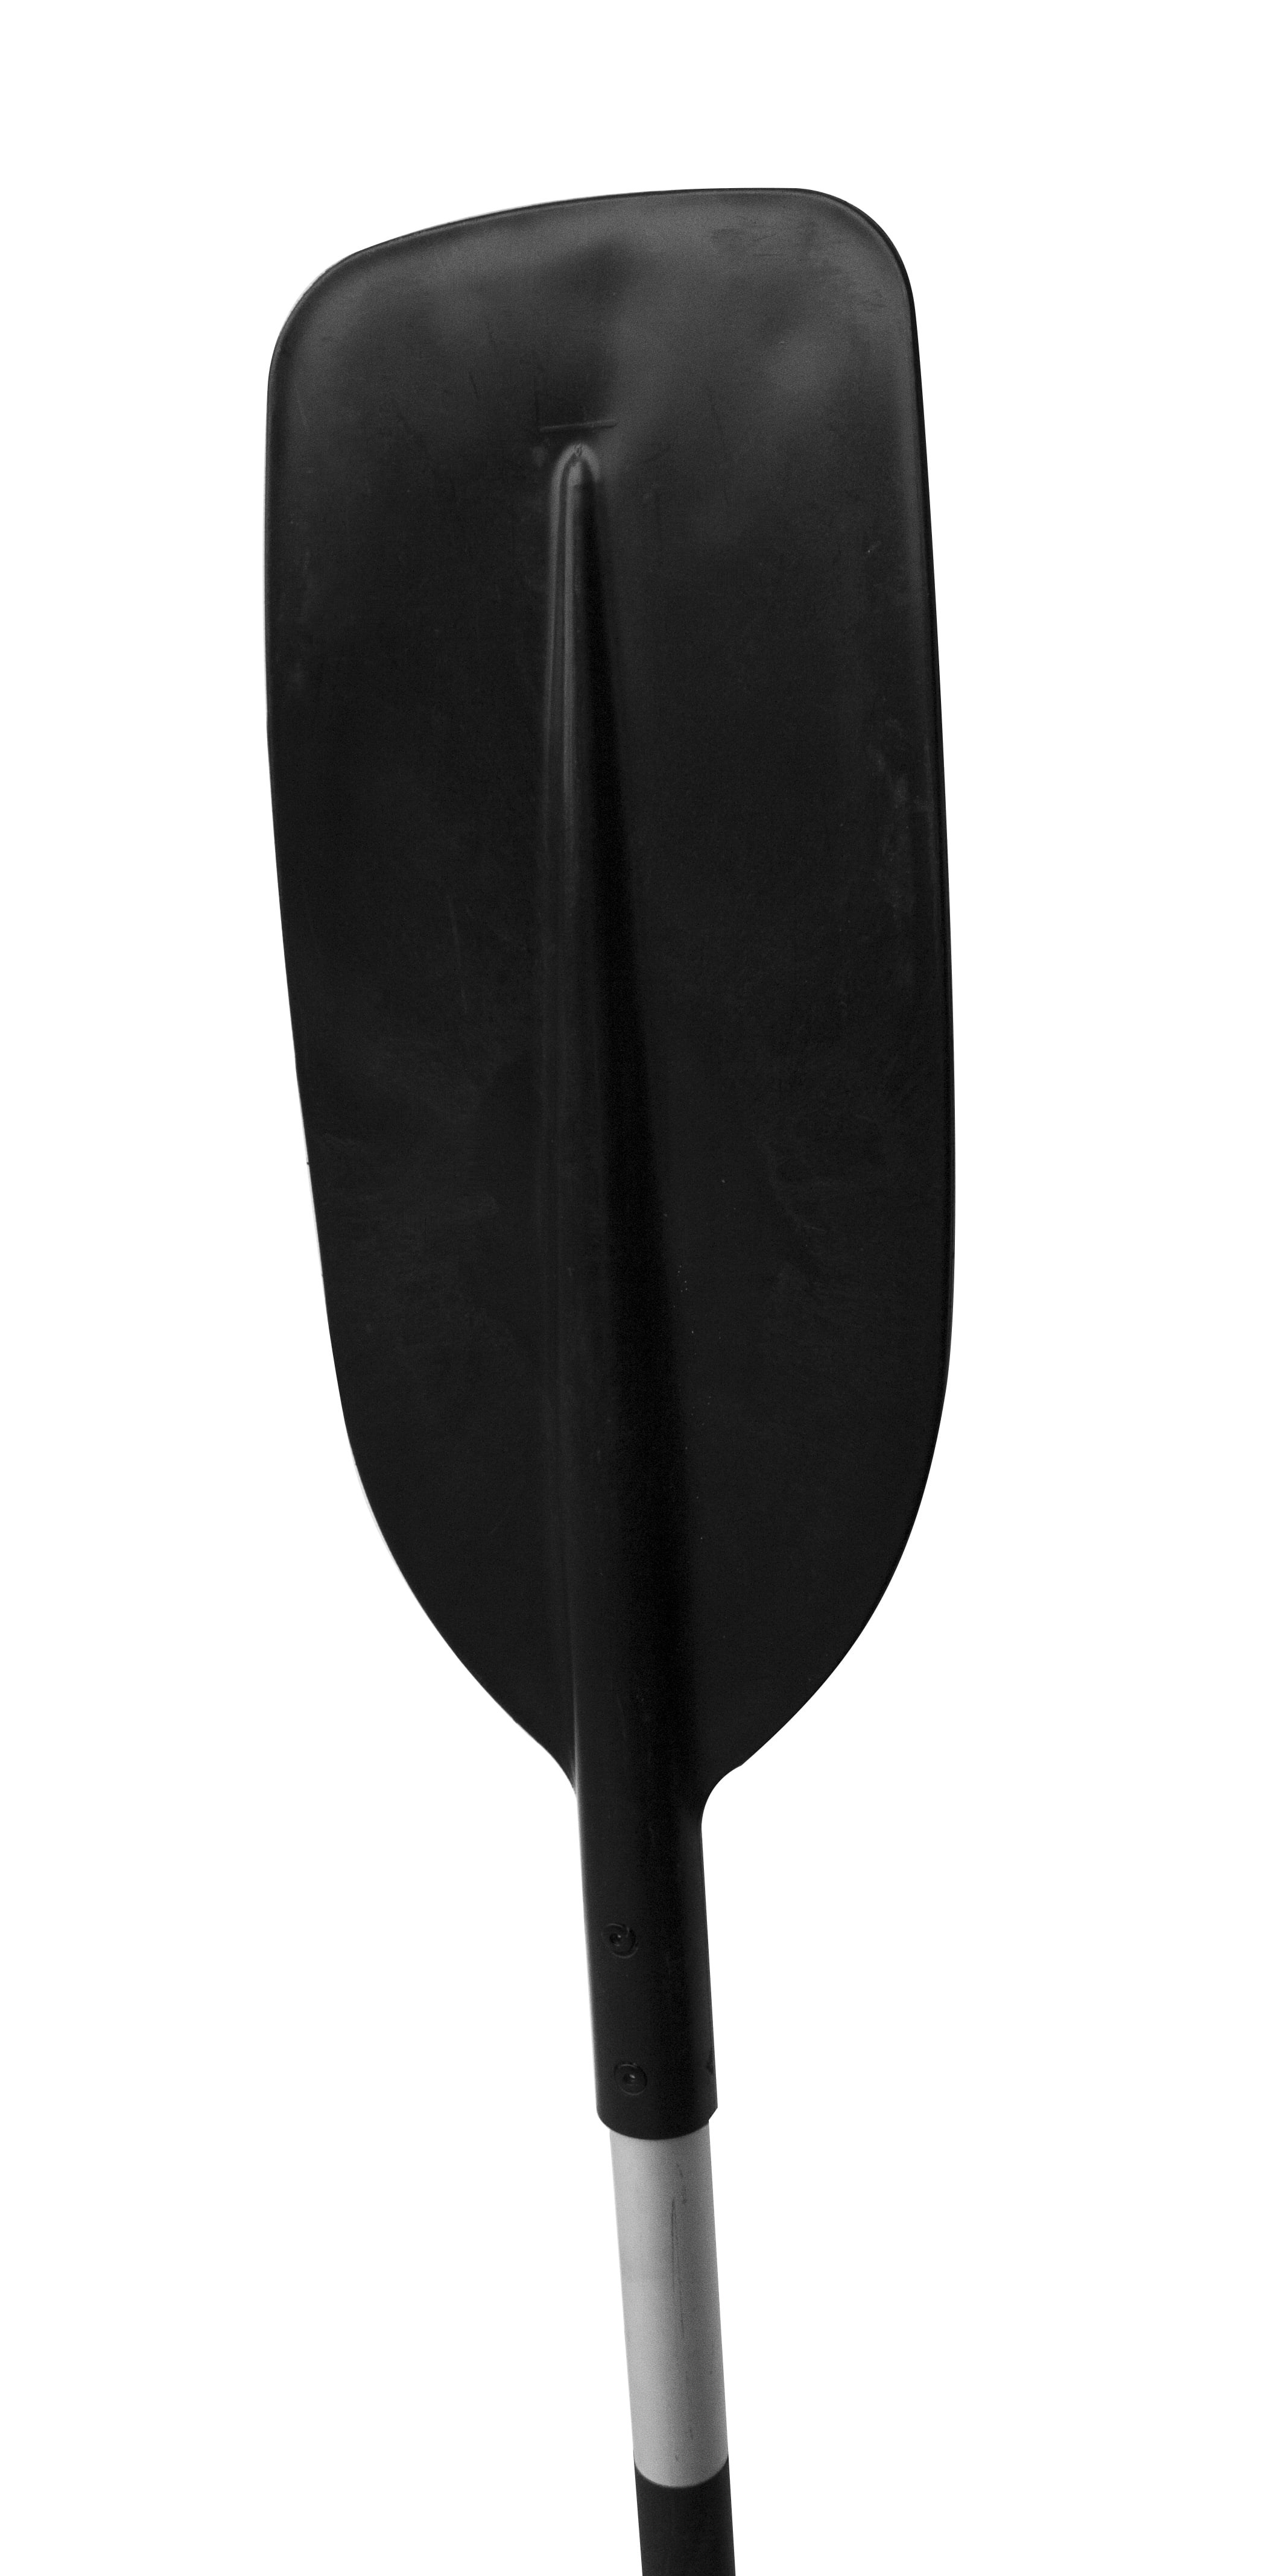 Corrugated Plastic Paddles – Double Sided Black Numbers – Oval or Round